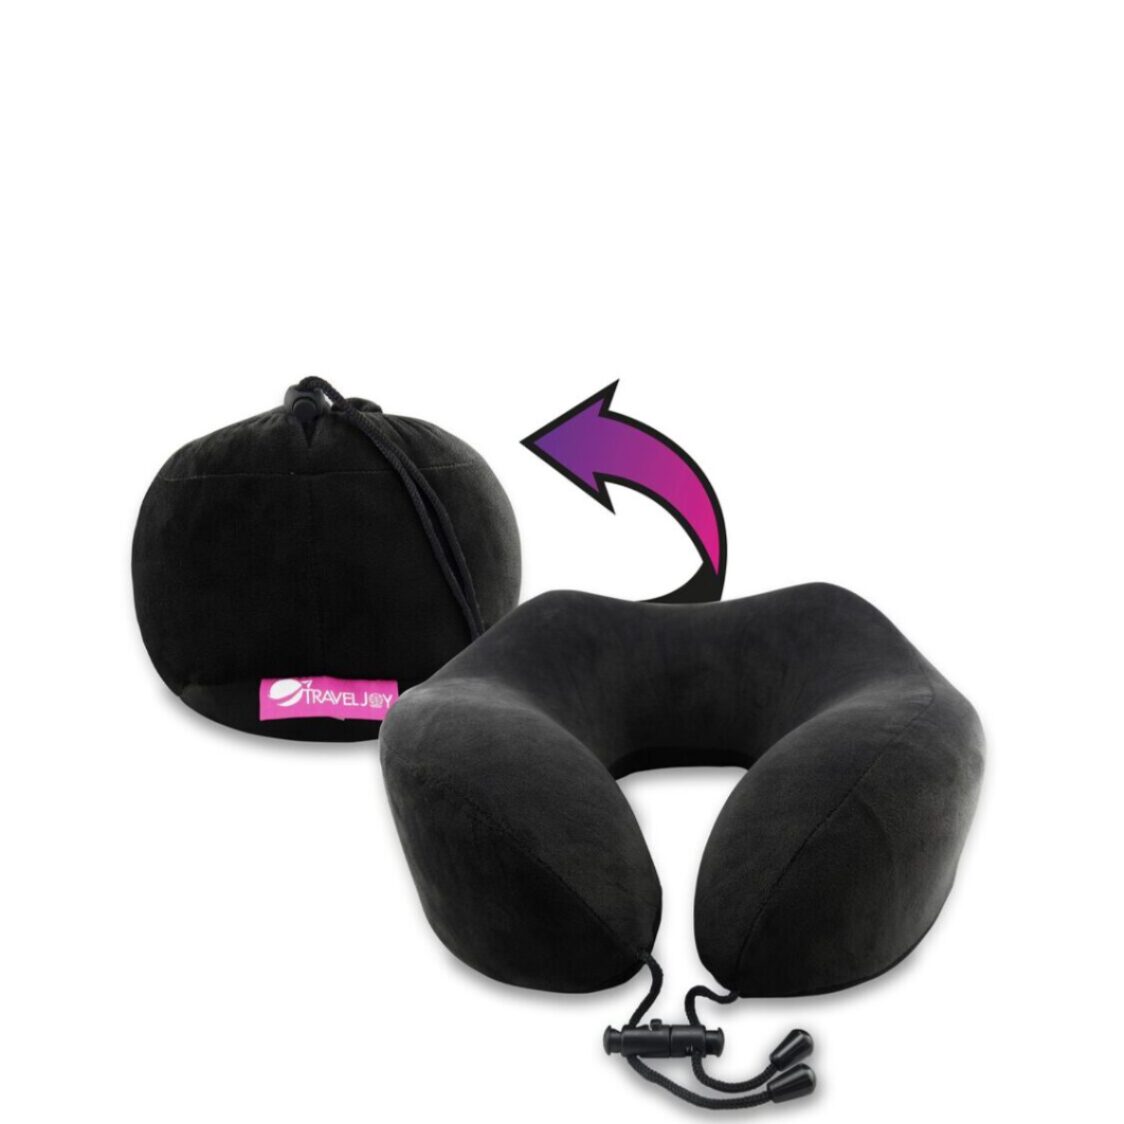 Travel Joy Rollable Travel Pillow - Charcoal Grey